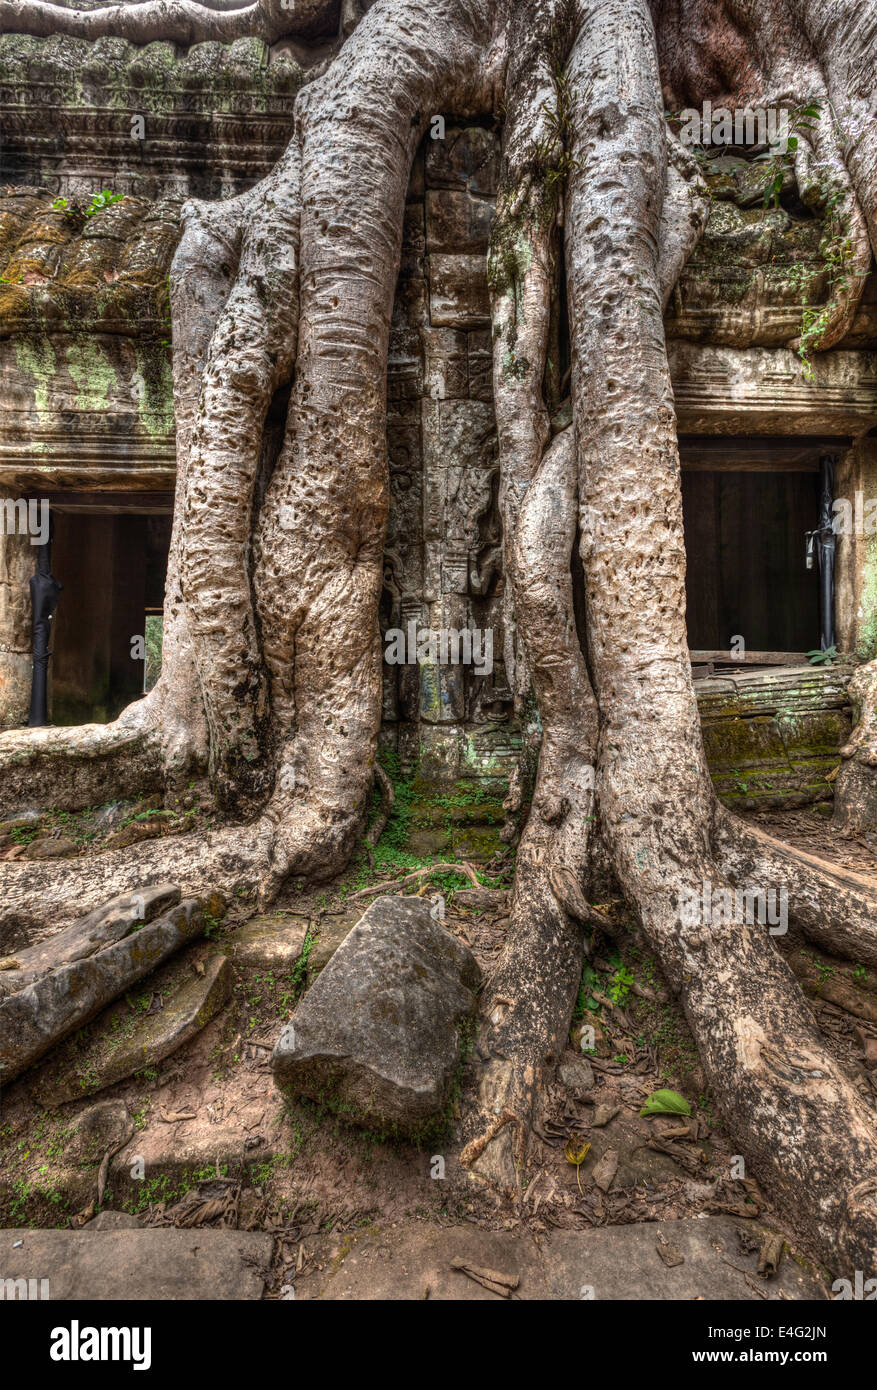 High dynamic range (hdr) image of ancient ruins with tree roots, Ta Prohm temple ruins, Angkor, Cambodia Stock Photo